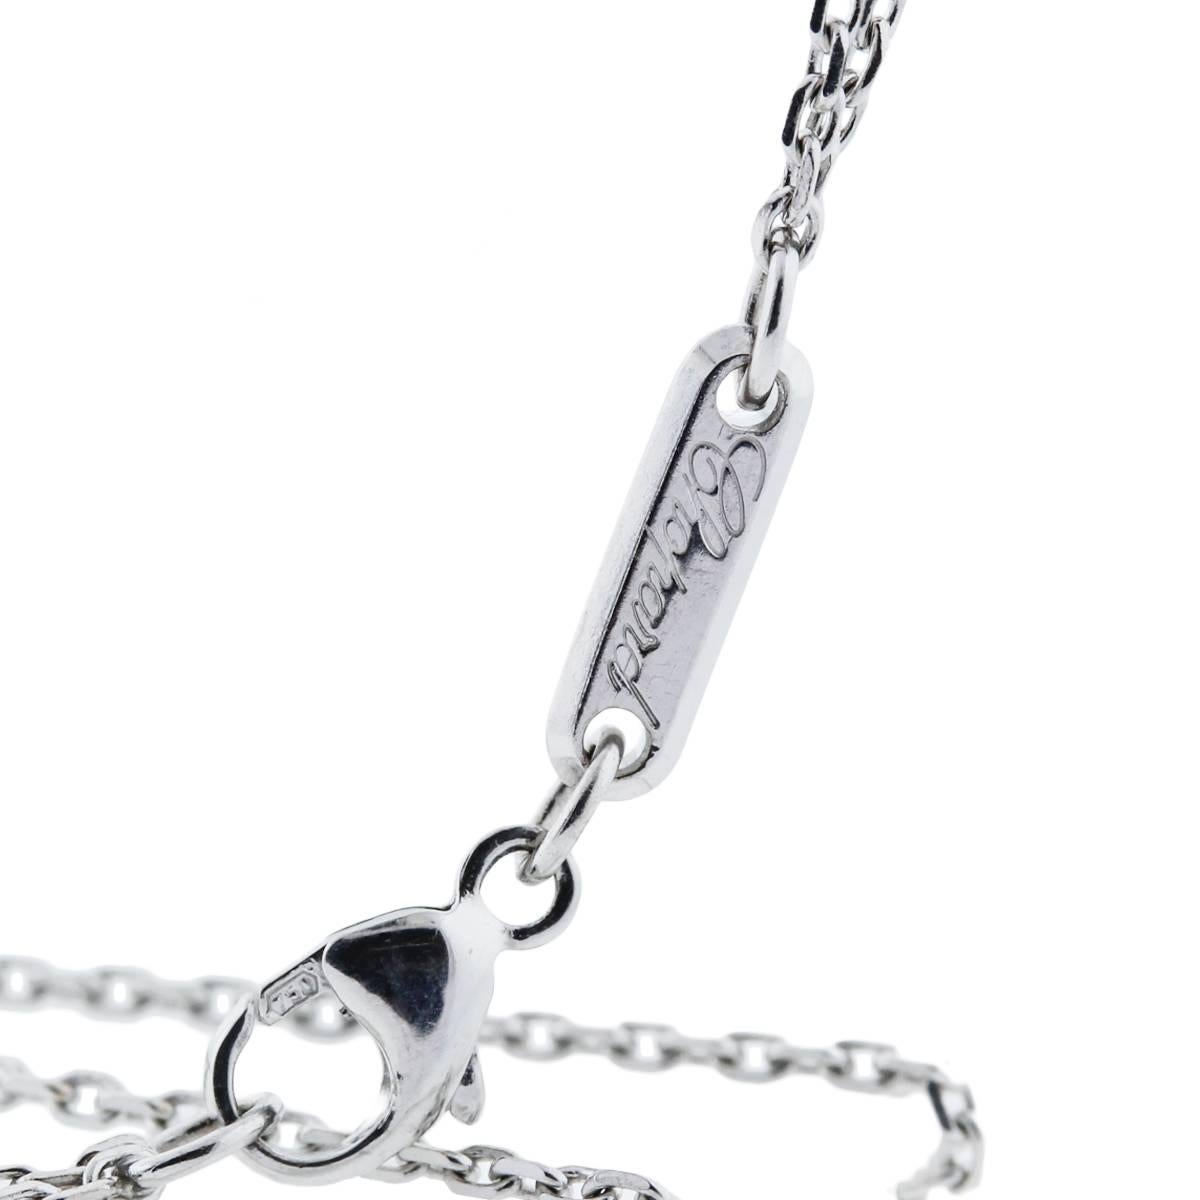 Style
Chopard 18K White Gold Happy Spirit Diamond Heart Necklace
Material	18k White  Gold
Total Weight 
17.8dwt (27.7g)
Necklace Length
Chain is 24''
Pendant Size	1.05" x 1.20"
Clasp	Lobster Clasp
Comes with
Authentic Chopard Box and